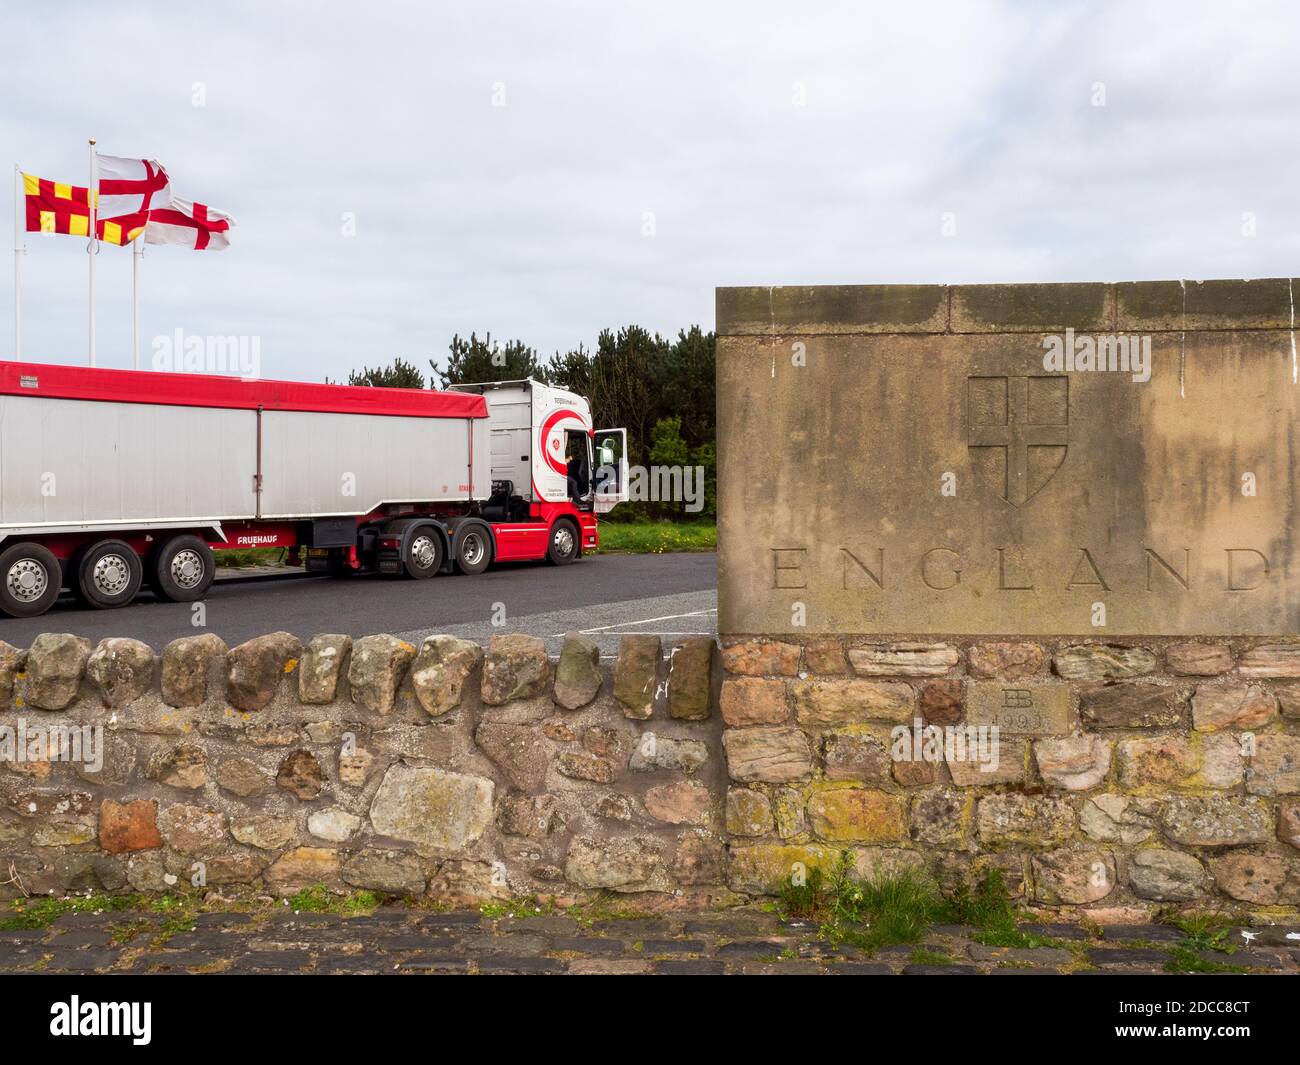 A truck parked at the England/Scotland border. Stock Photo